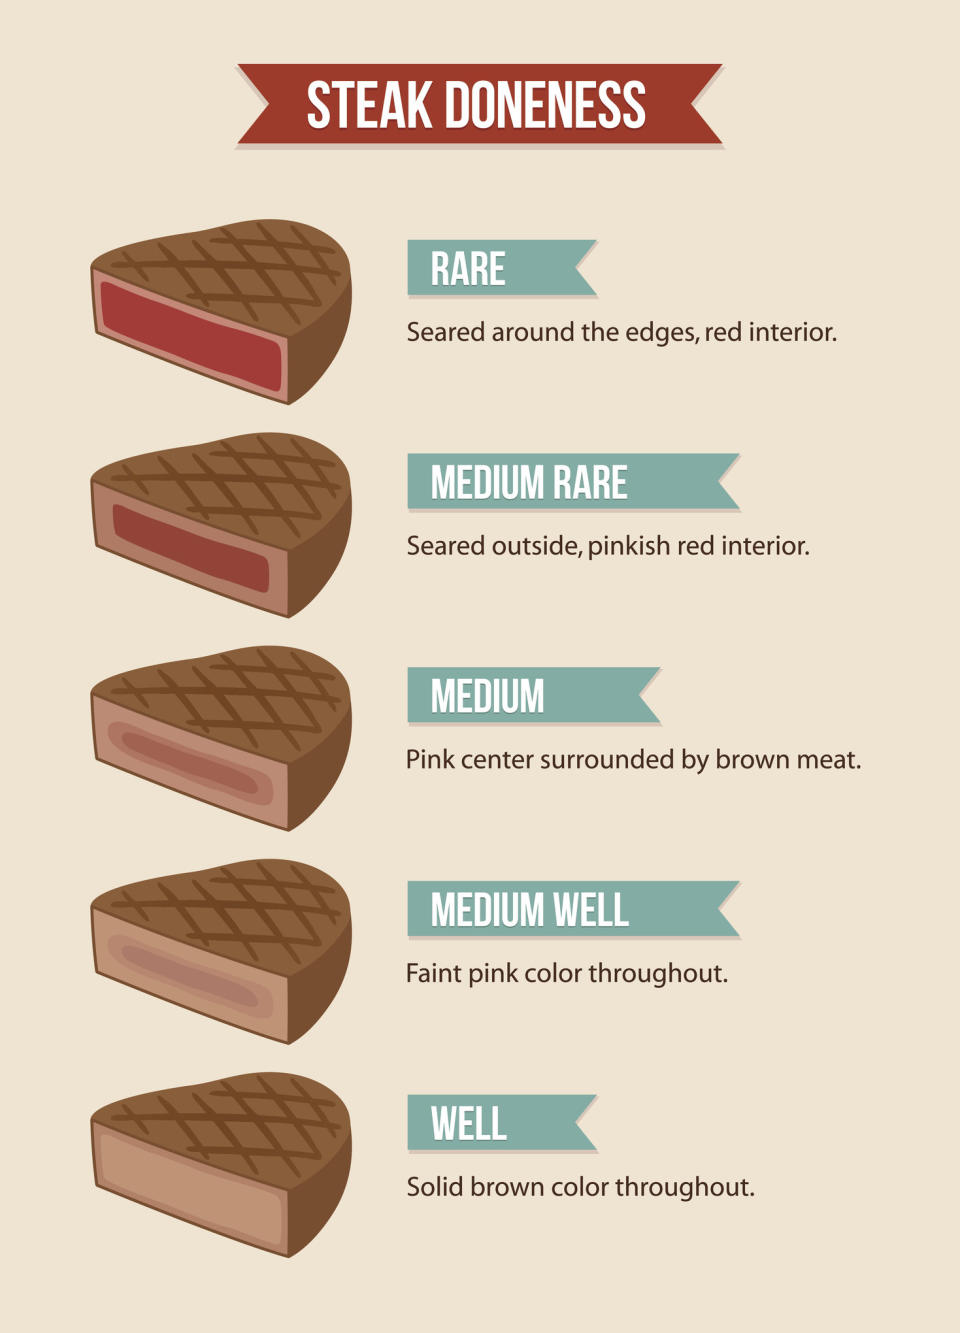 A chart explaining the different levels of done-ness based on the steak's color